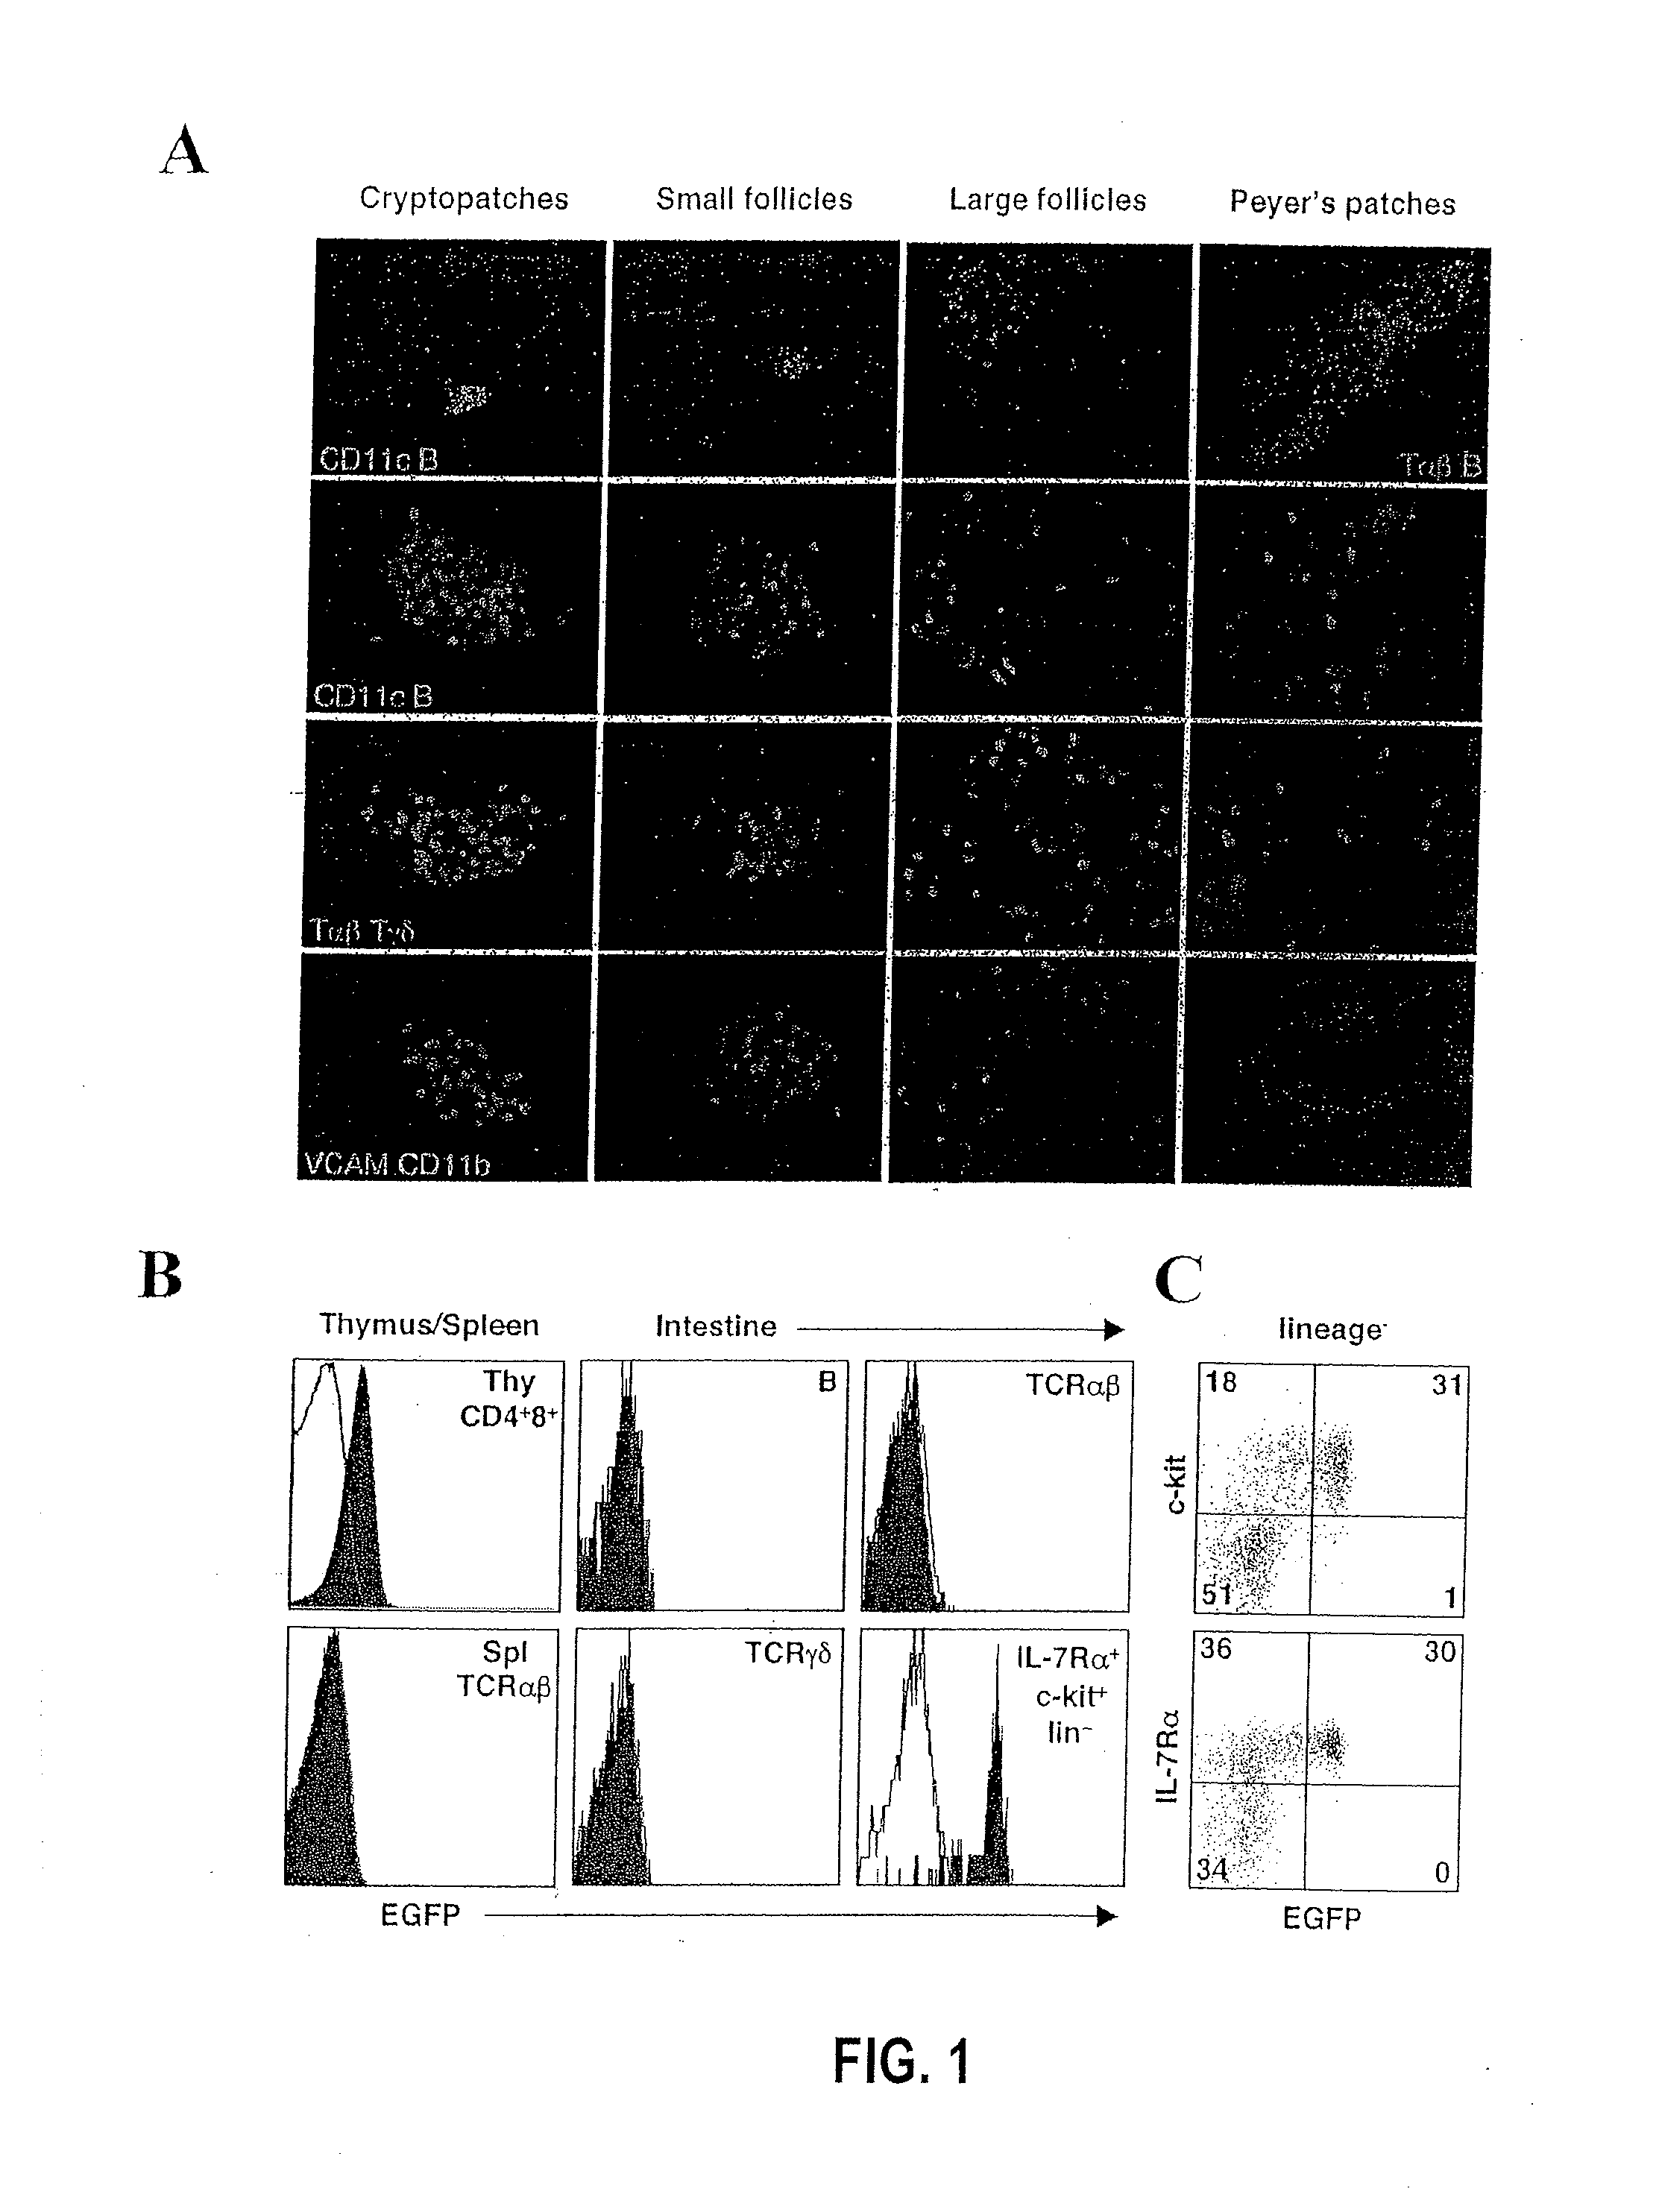 Compositions and methods for modulation of rorgammat functions